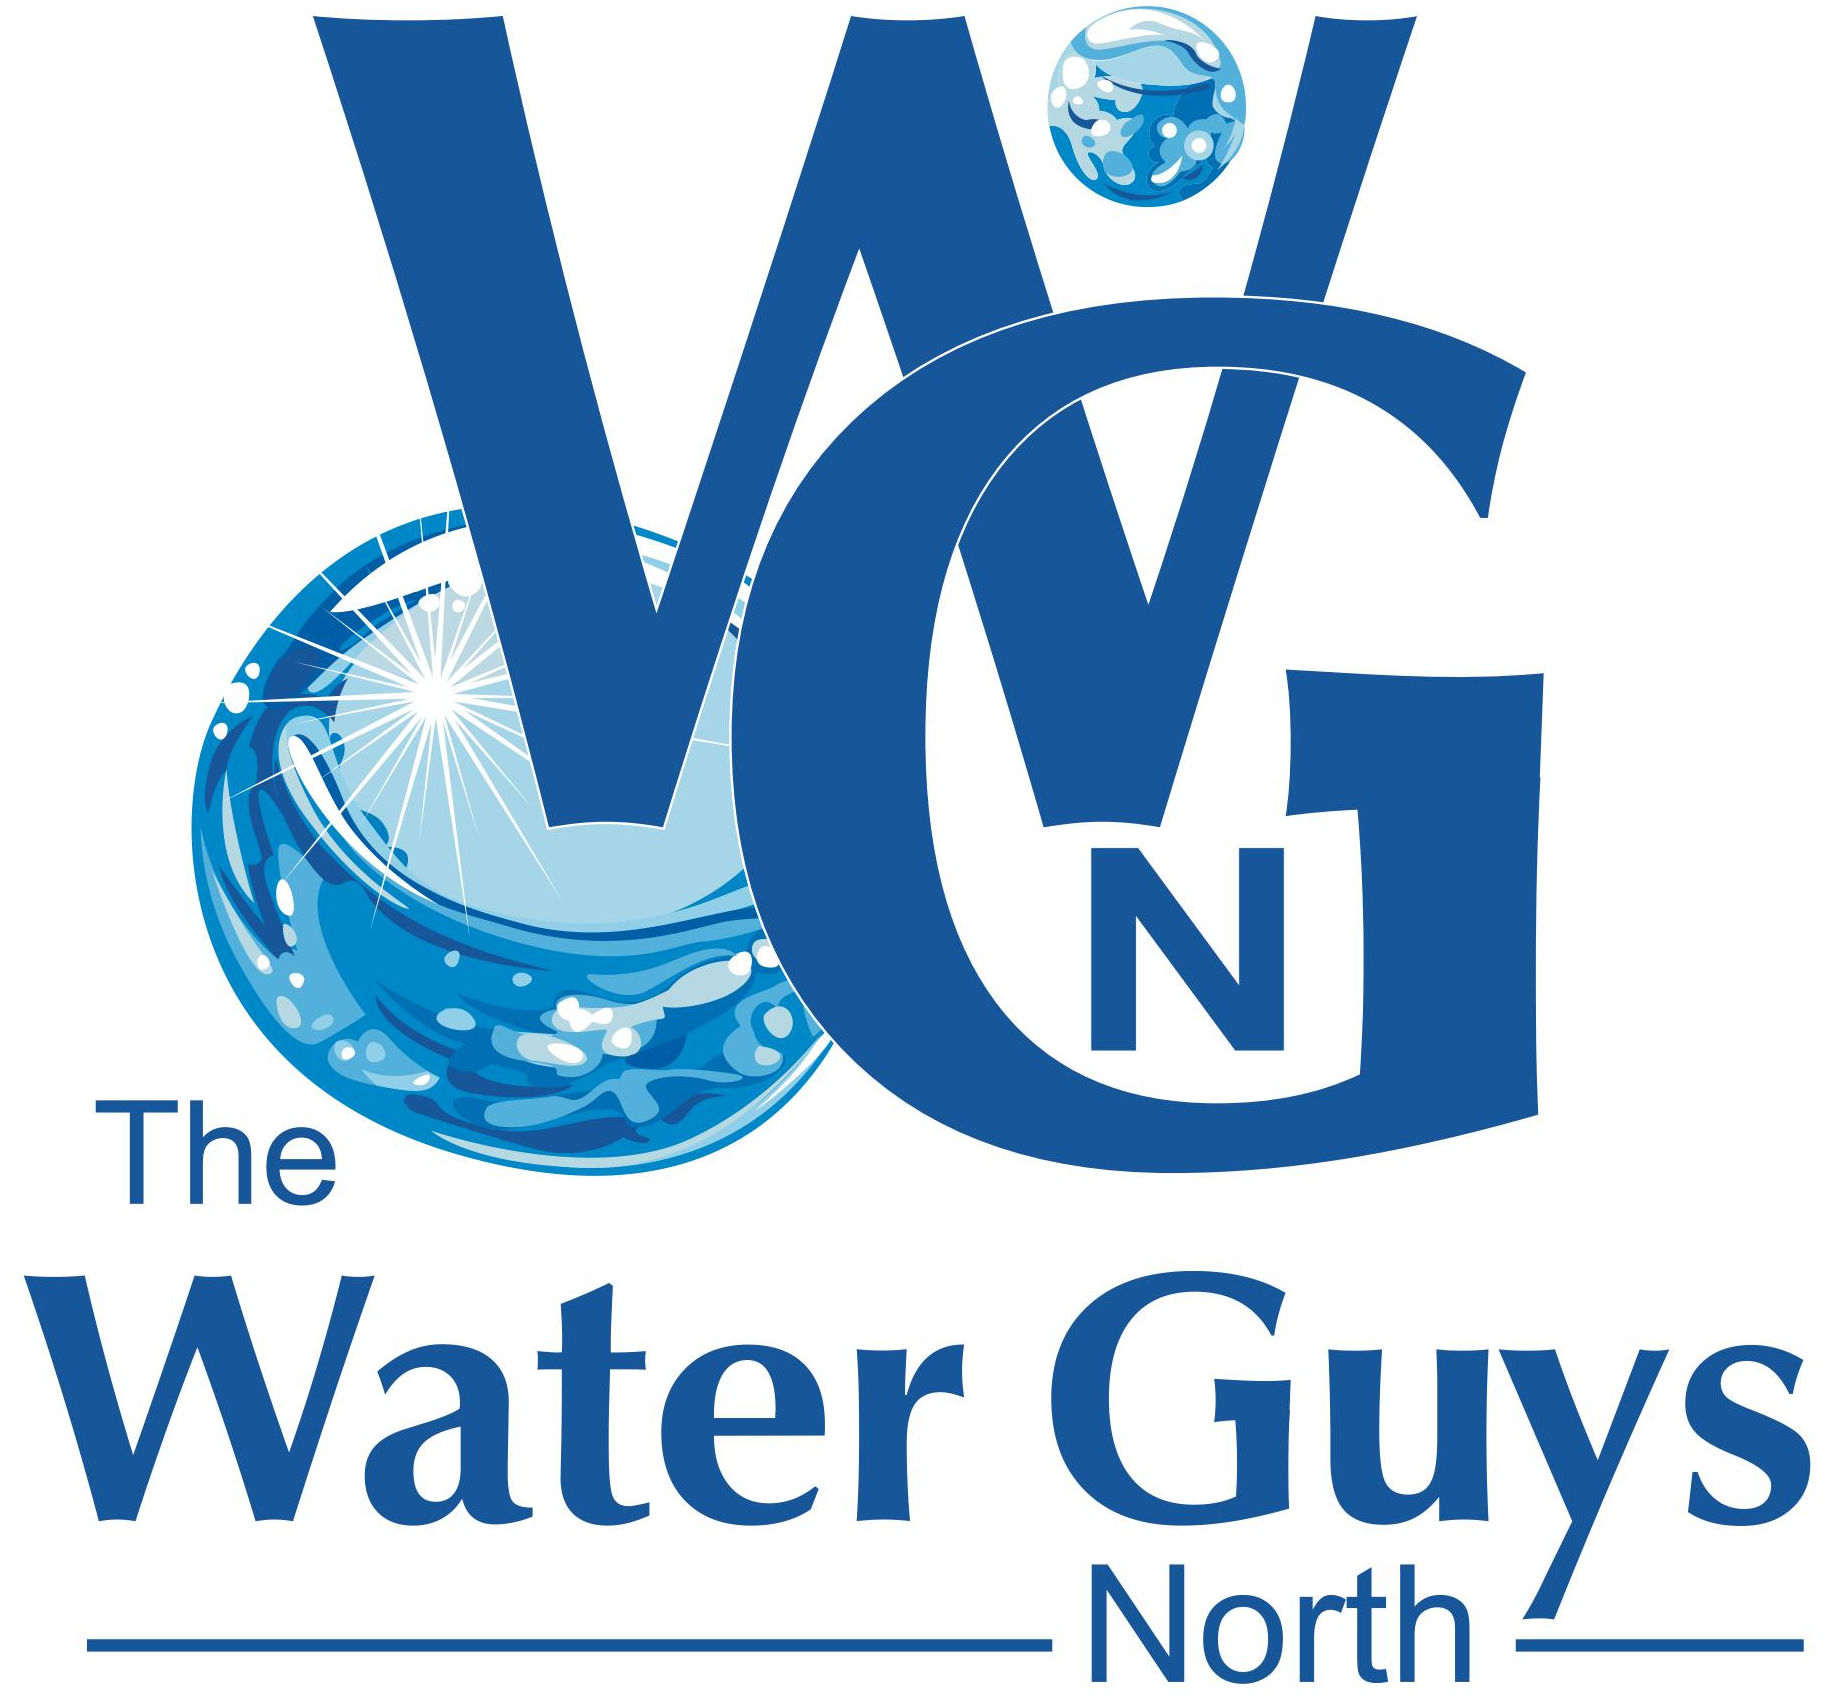 The Water Guys North Provides Drinking Water Filter Systems for Homes